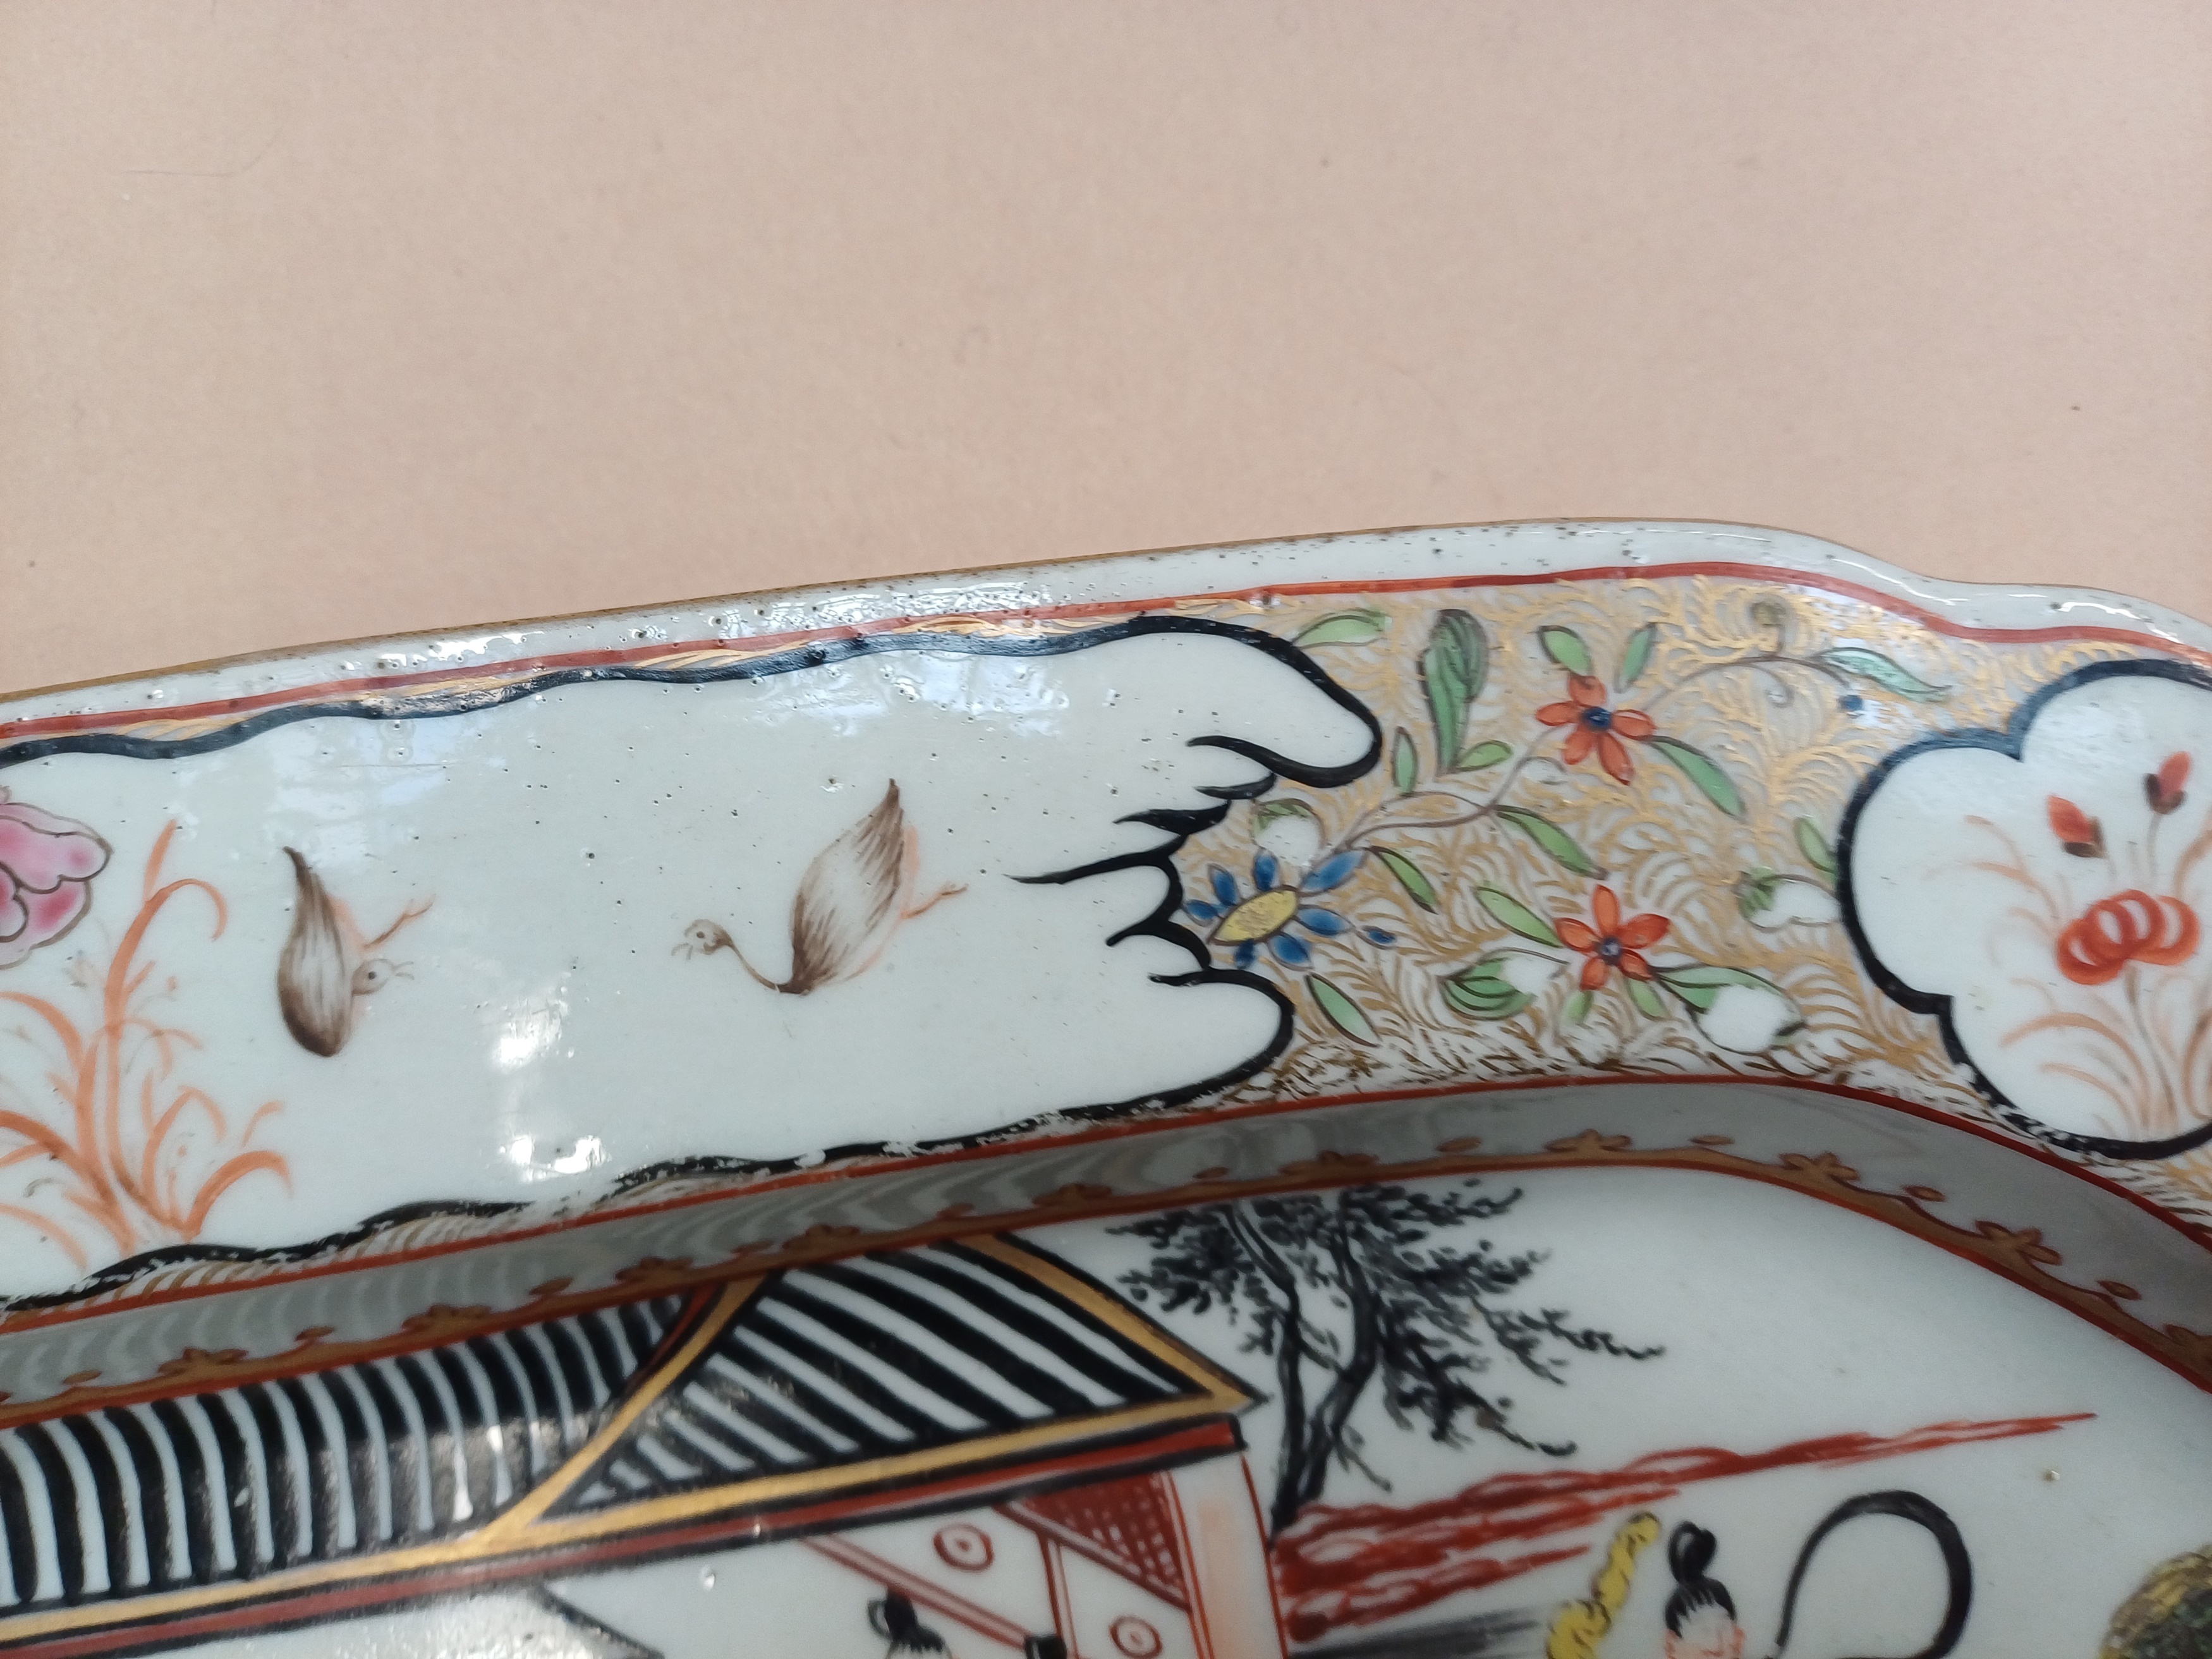 A PAIR OF CHINESE EXPORT FAMILLE-ROSE 'FIGURATIVE' DISHES 清雍正 外銷粉彩人物故事圖紋盤一對 - Image 16 of 18